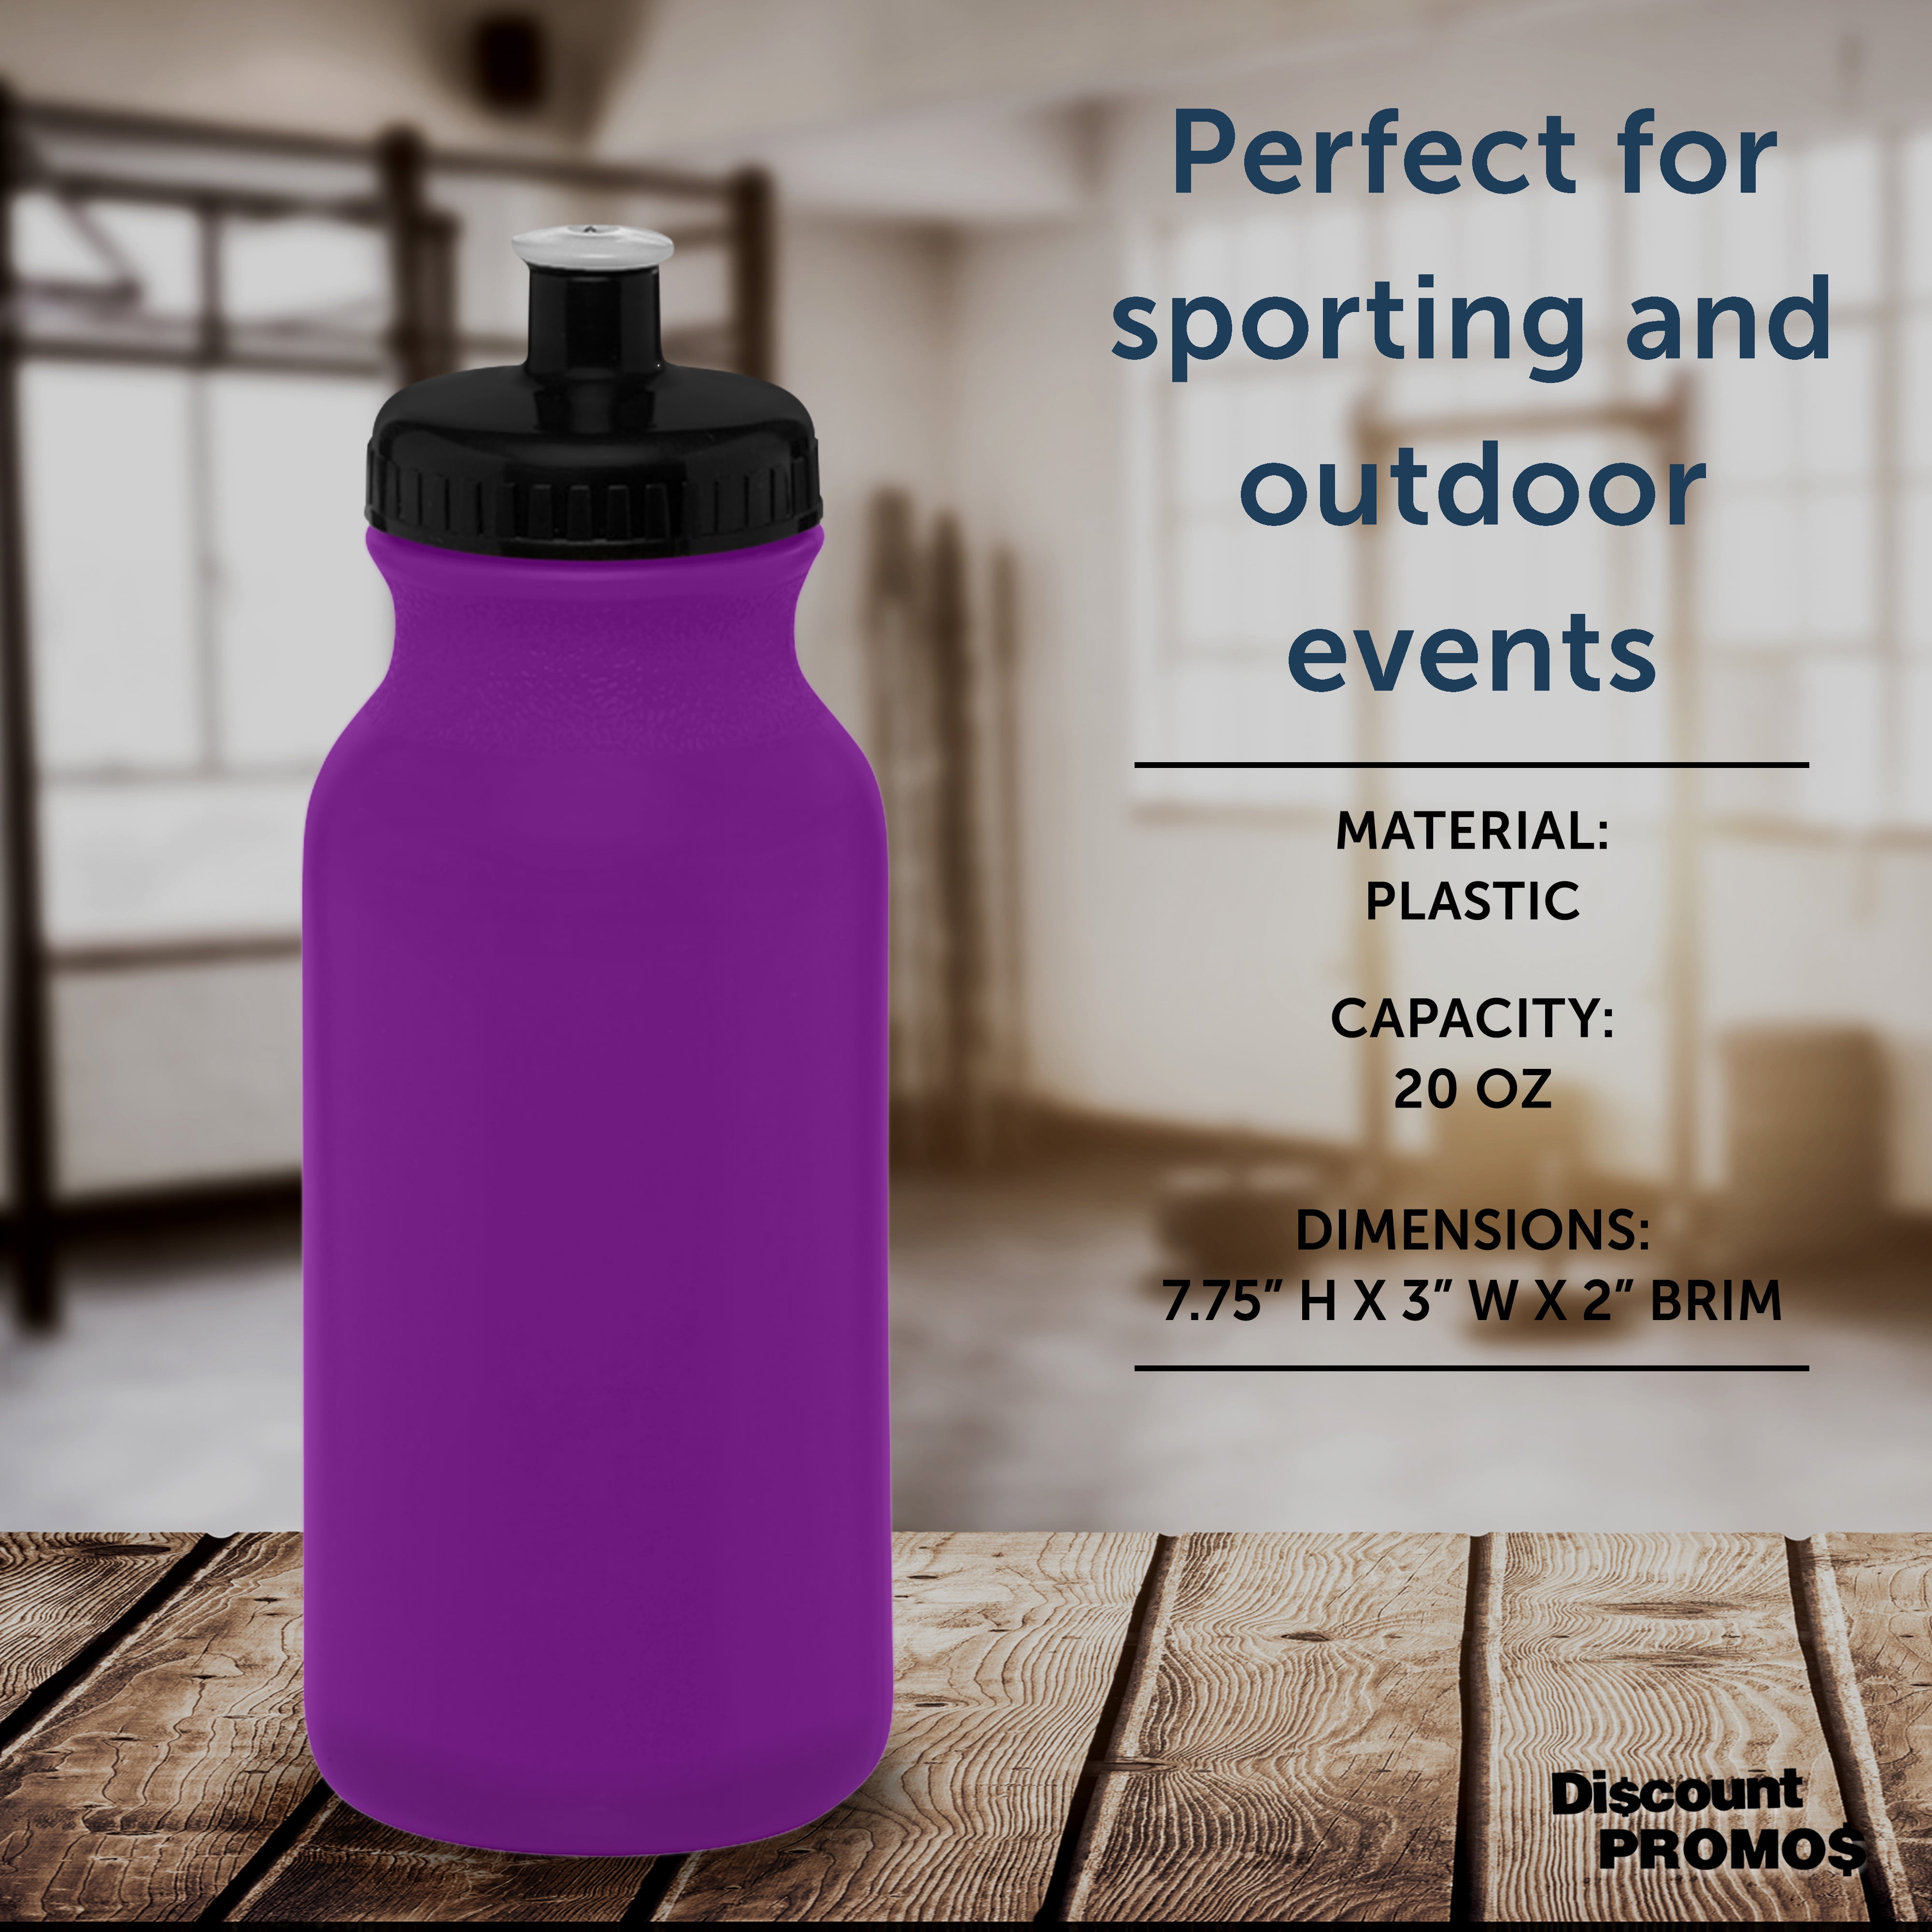 GOPPUS 20oz Insulated Stainless Steel Water Bottle with Straw Lid Reusable  Leakproof Water Flask, Ke…See more GOPPUS 20oz Insulated Stainless Steel